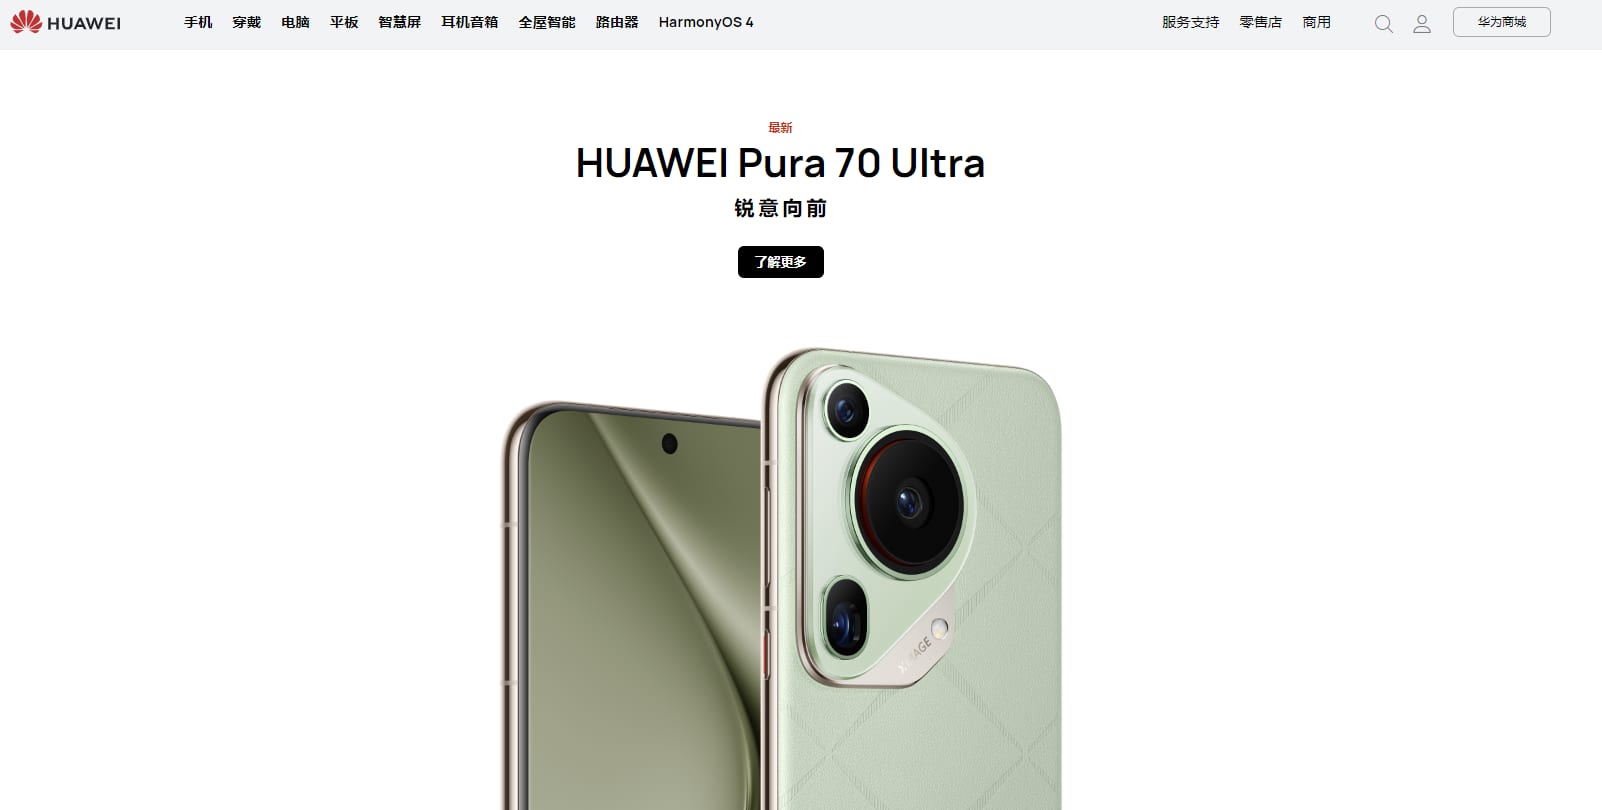 Huawei launches the Pura 70 smartphone to challenge Apple in China